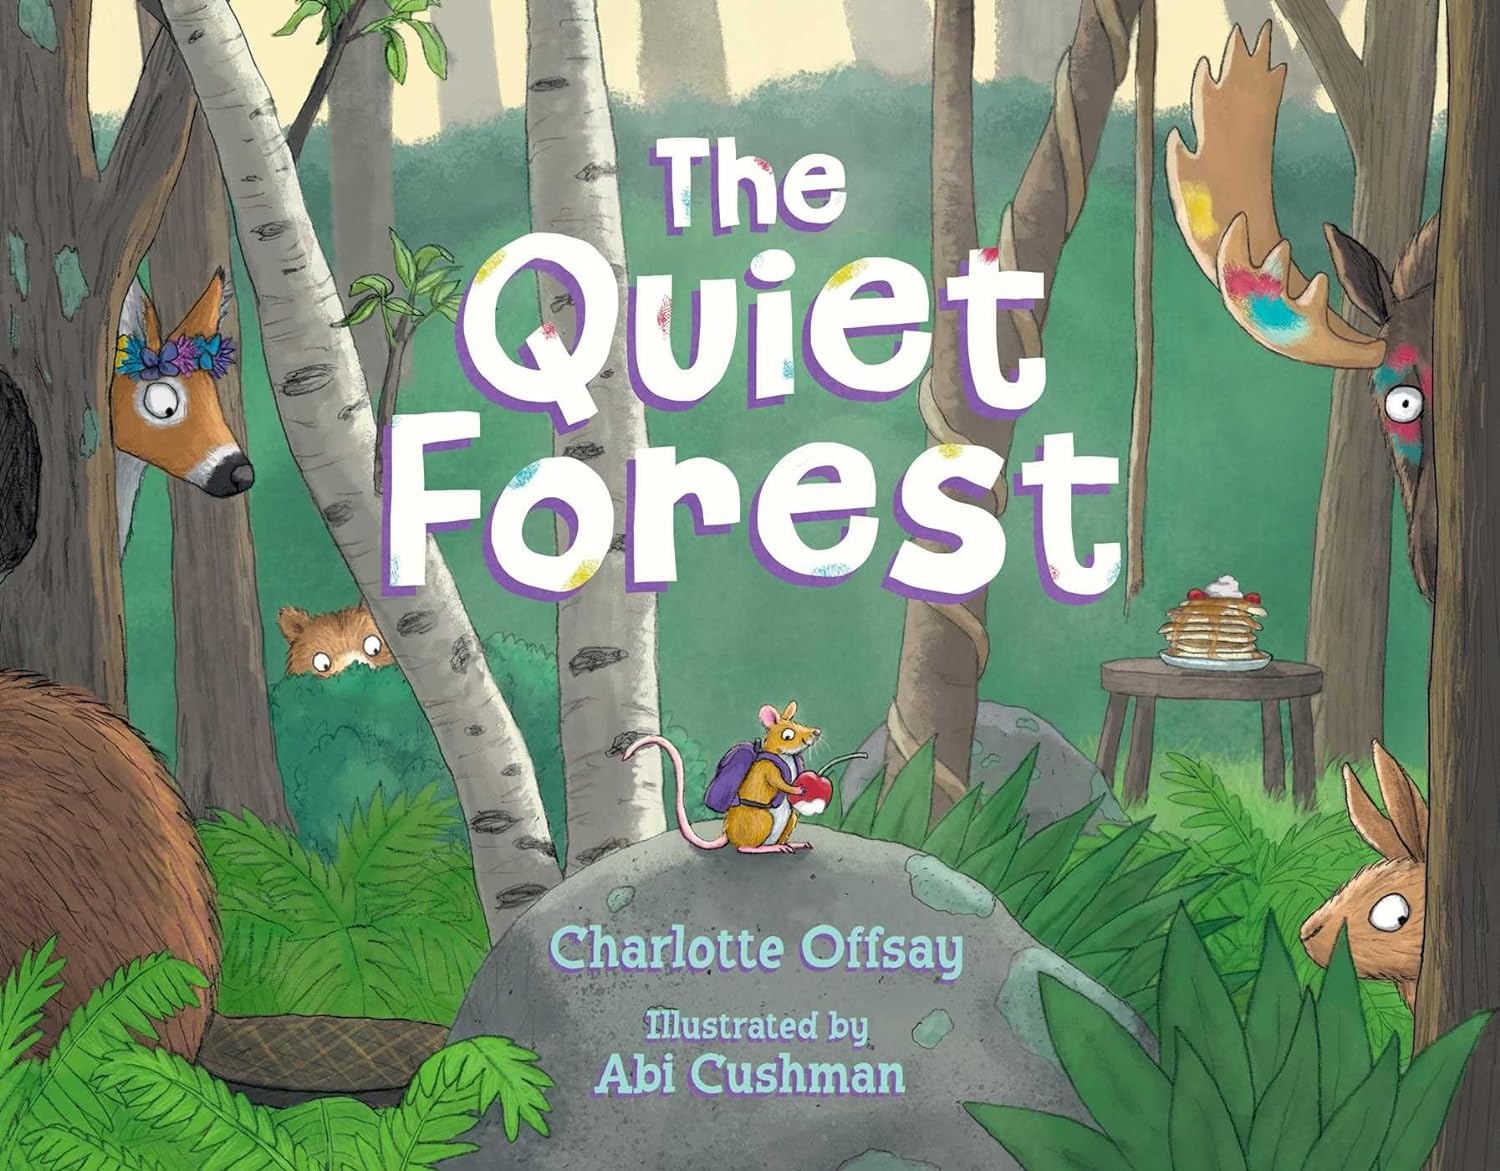 The Quiet Forest